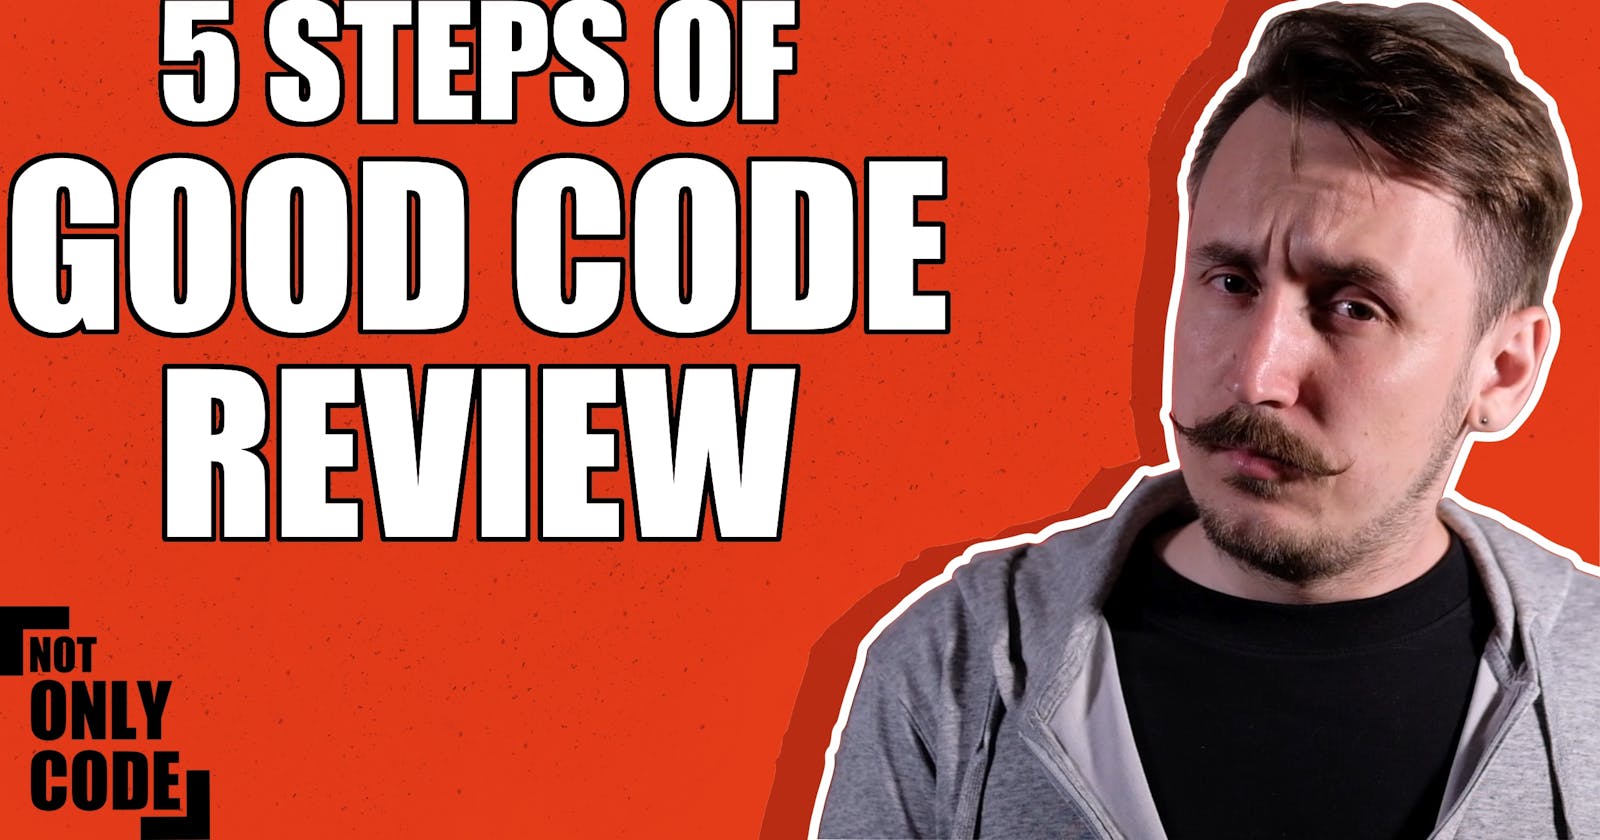 5 Steps of Good Code Review